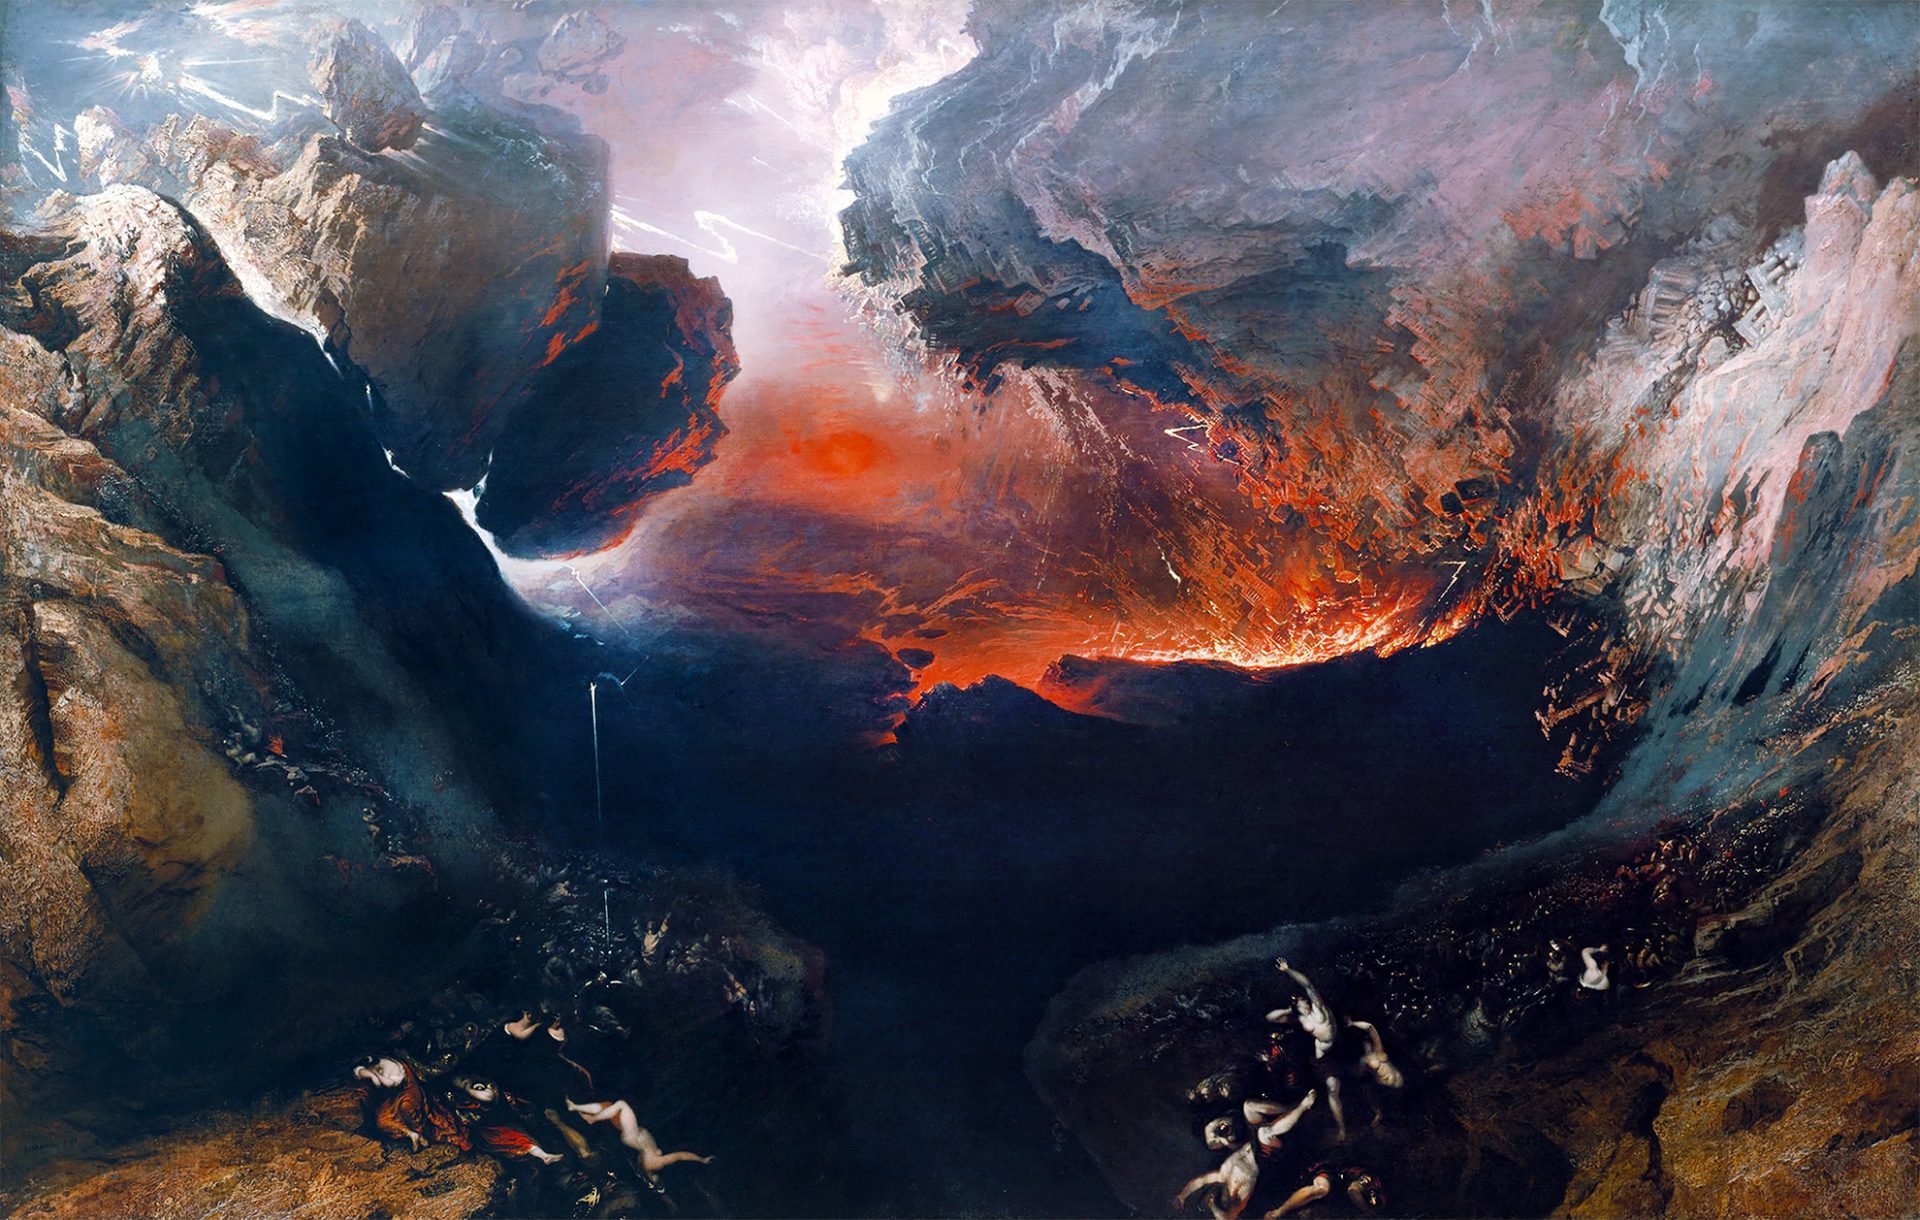 A painting of a dramatic landscape with a fiery red sky and dark, rocky cliffs. The sky is a deep red with a bright orange glow in the center. The cliffs are dark and jagged. The bottom of the painting is a dark abyss with figures falling into it.